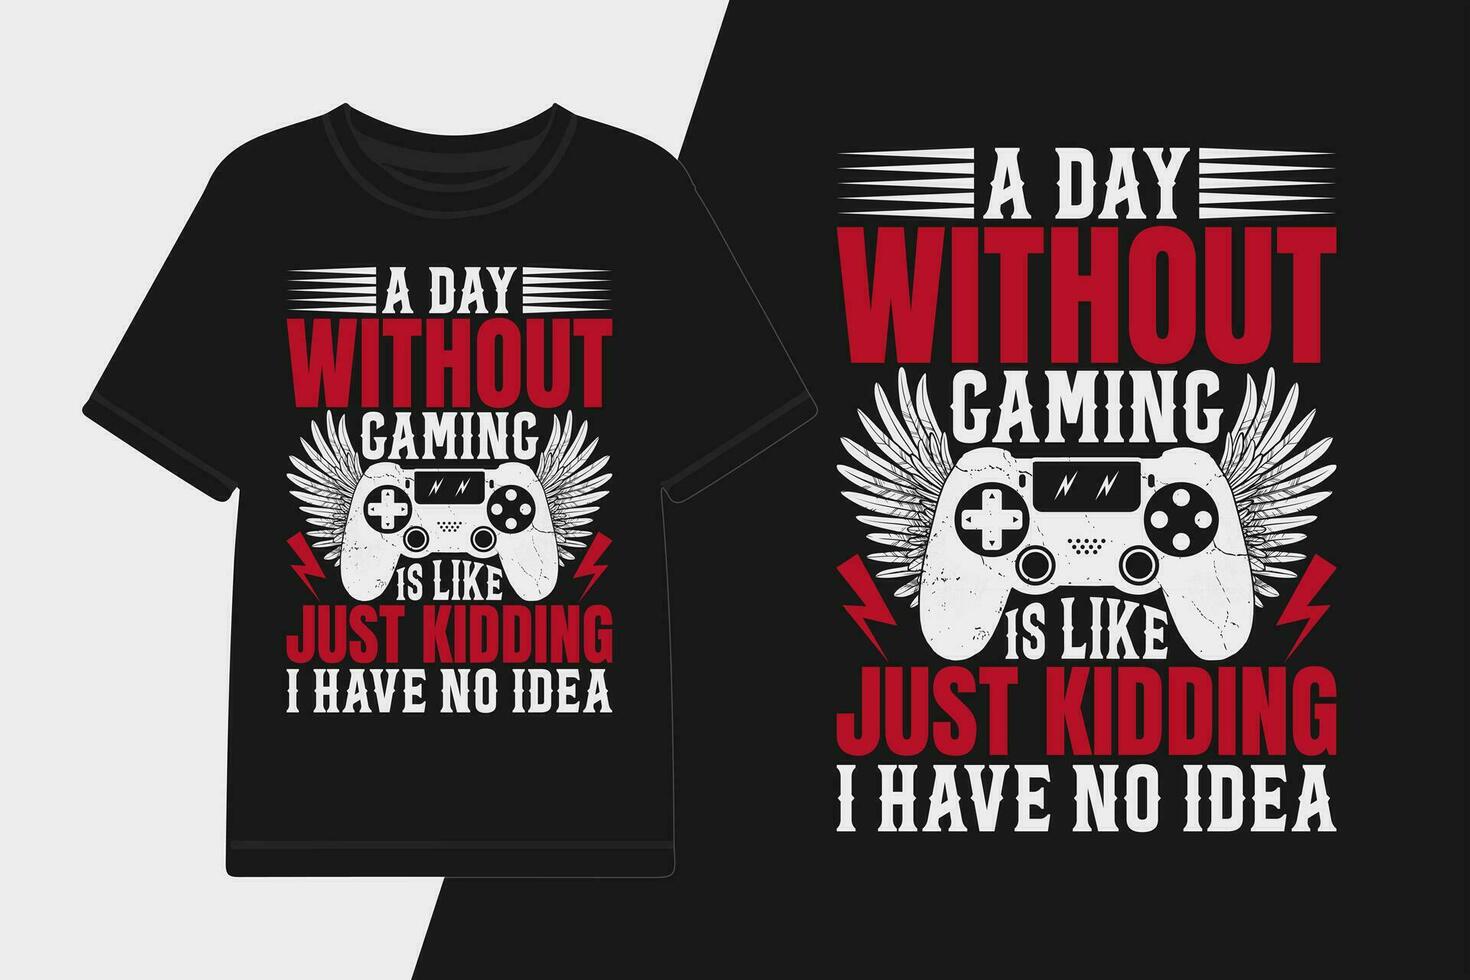 vector a day without gaming is like just kidding I have no idea, graphic t-shirt design.